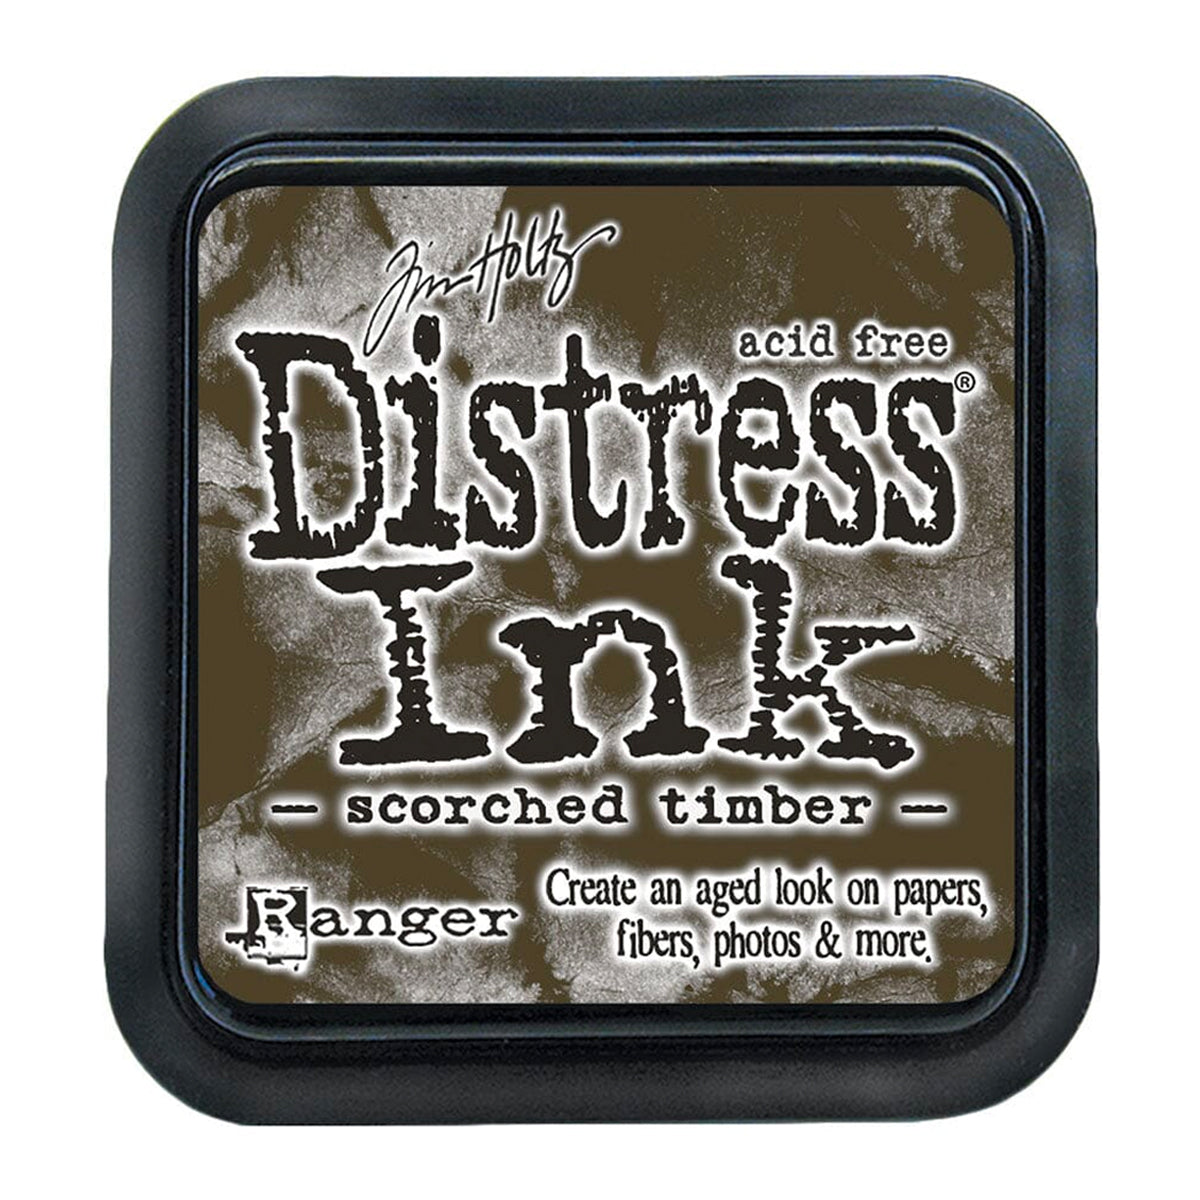 Tim Holtz Distress Dye Ink Pad - Scorched Timber